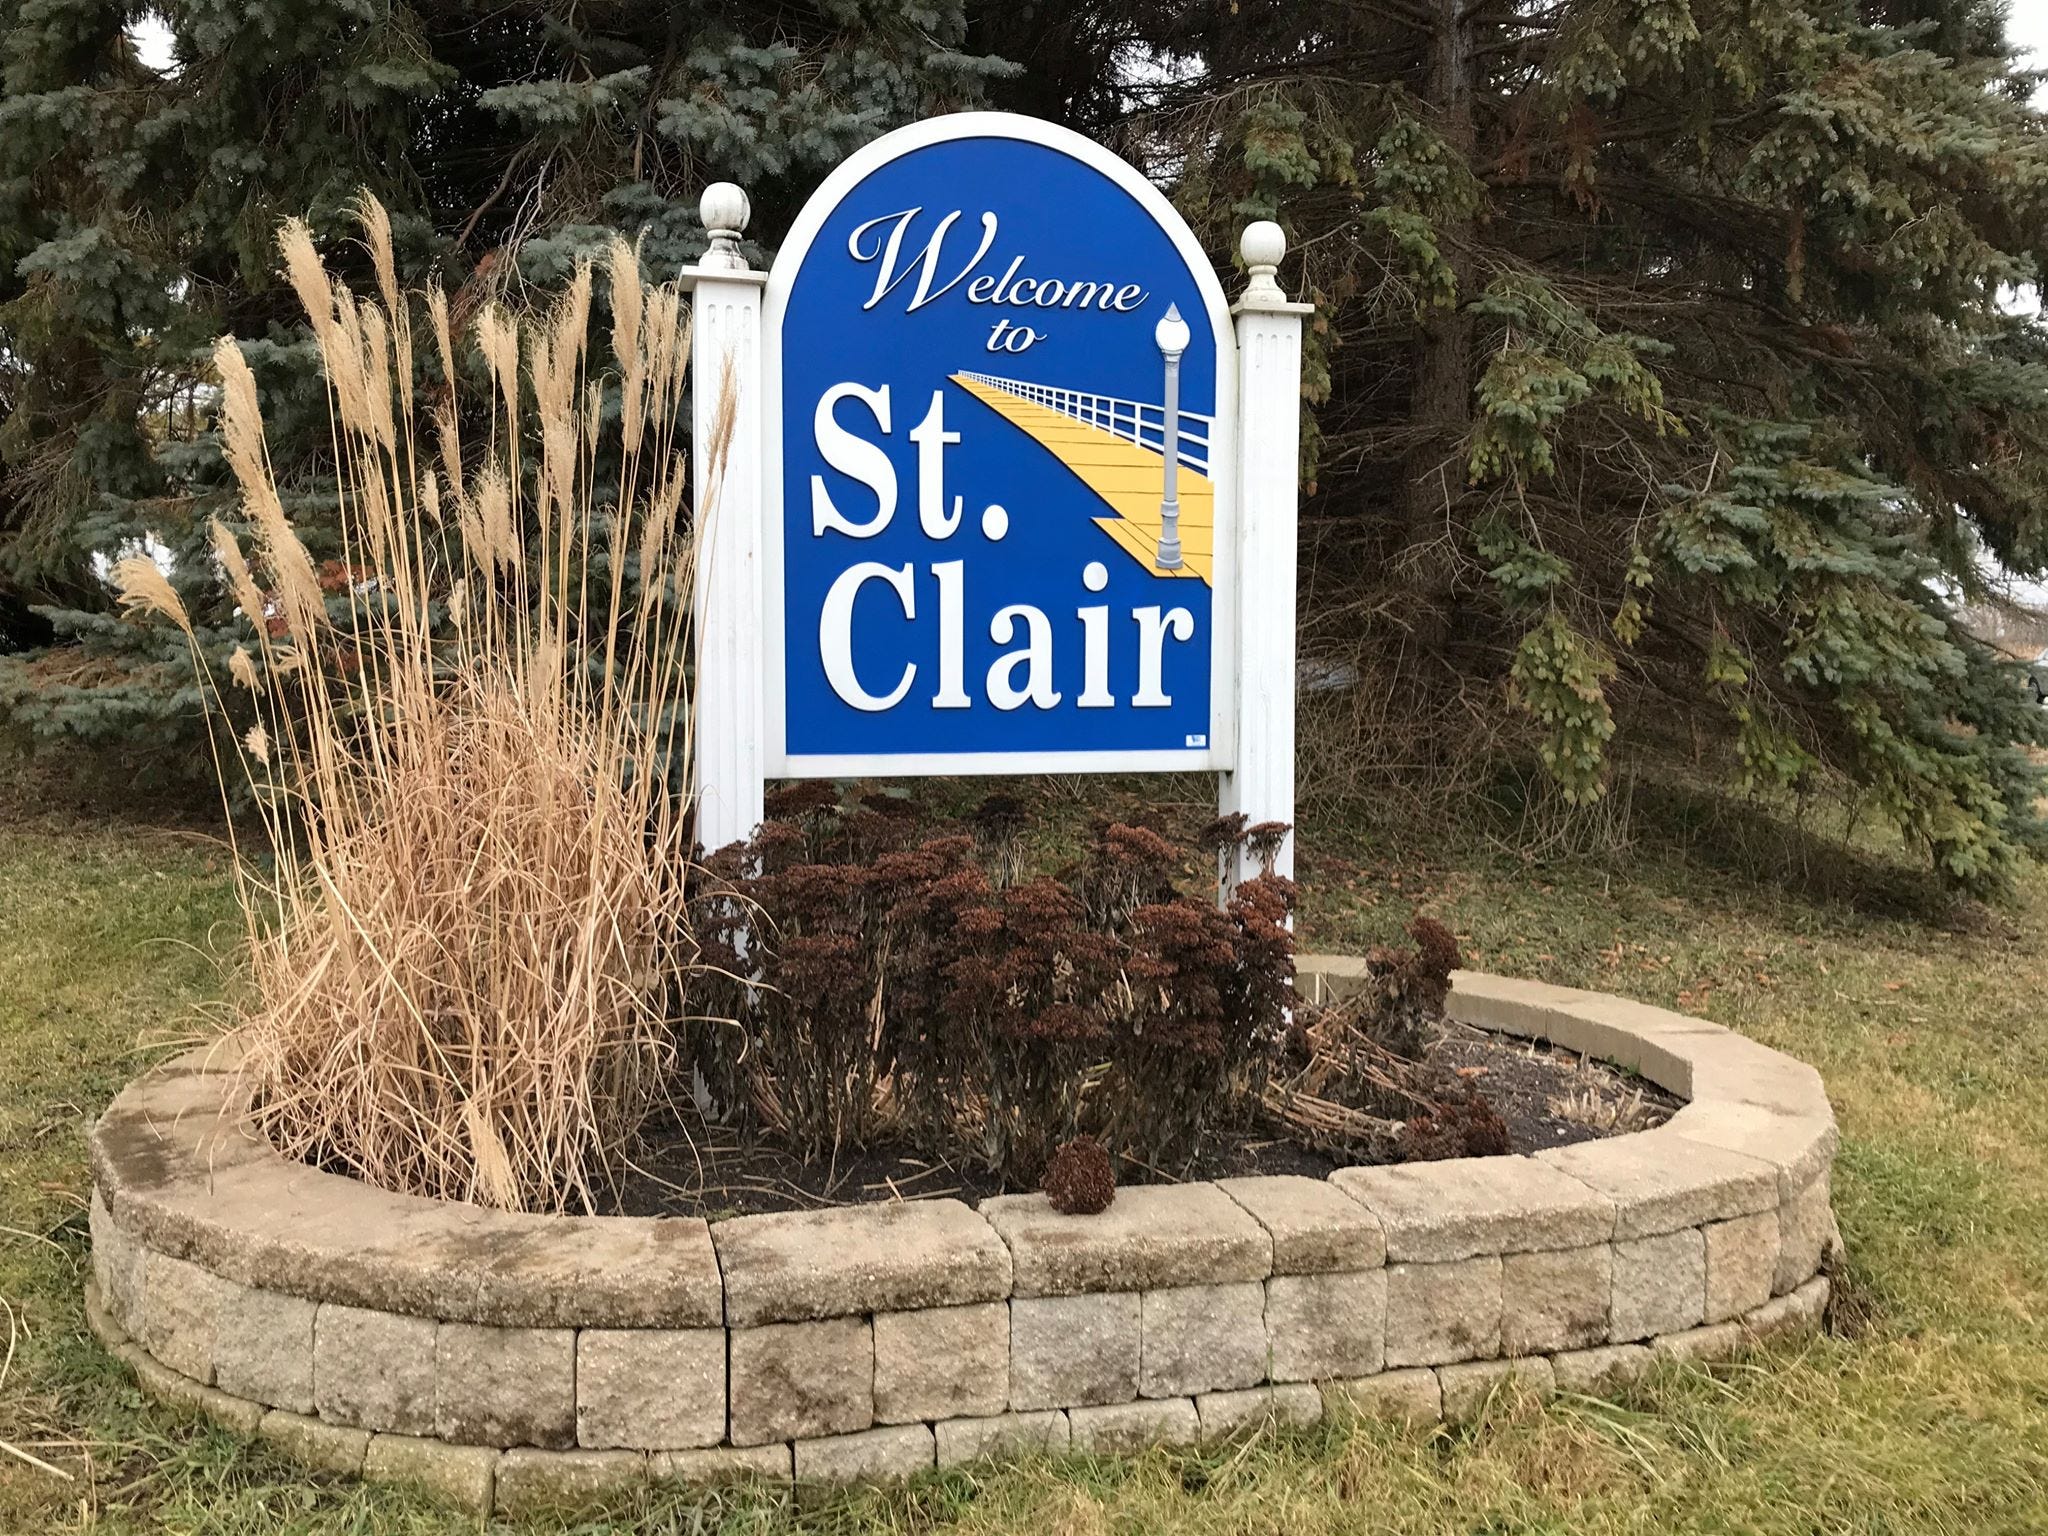 There are plans to potentially break ground for an estimated $7.5 million project in St. Clair this spring.